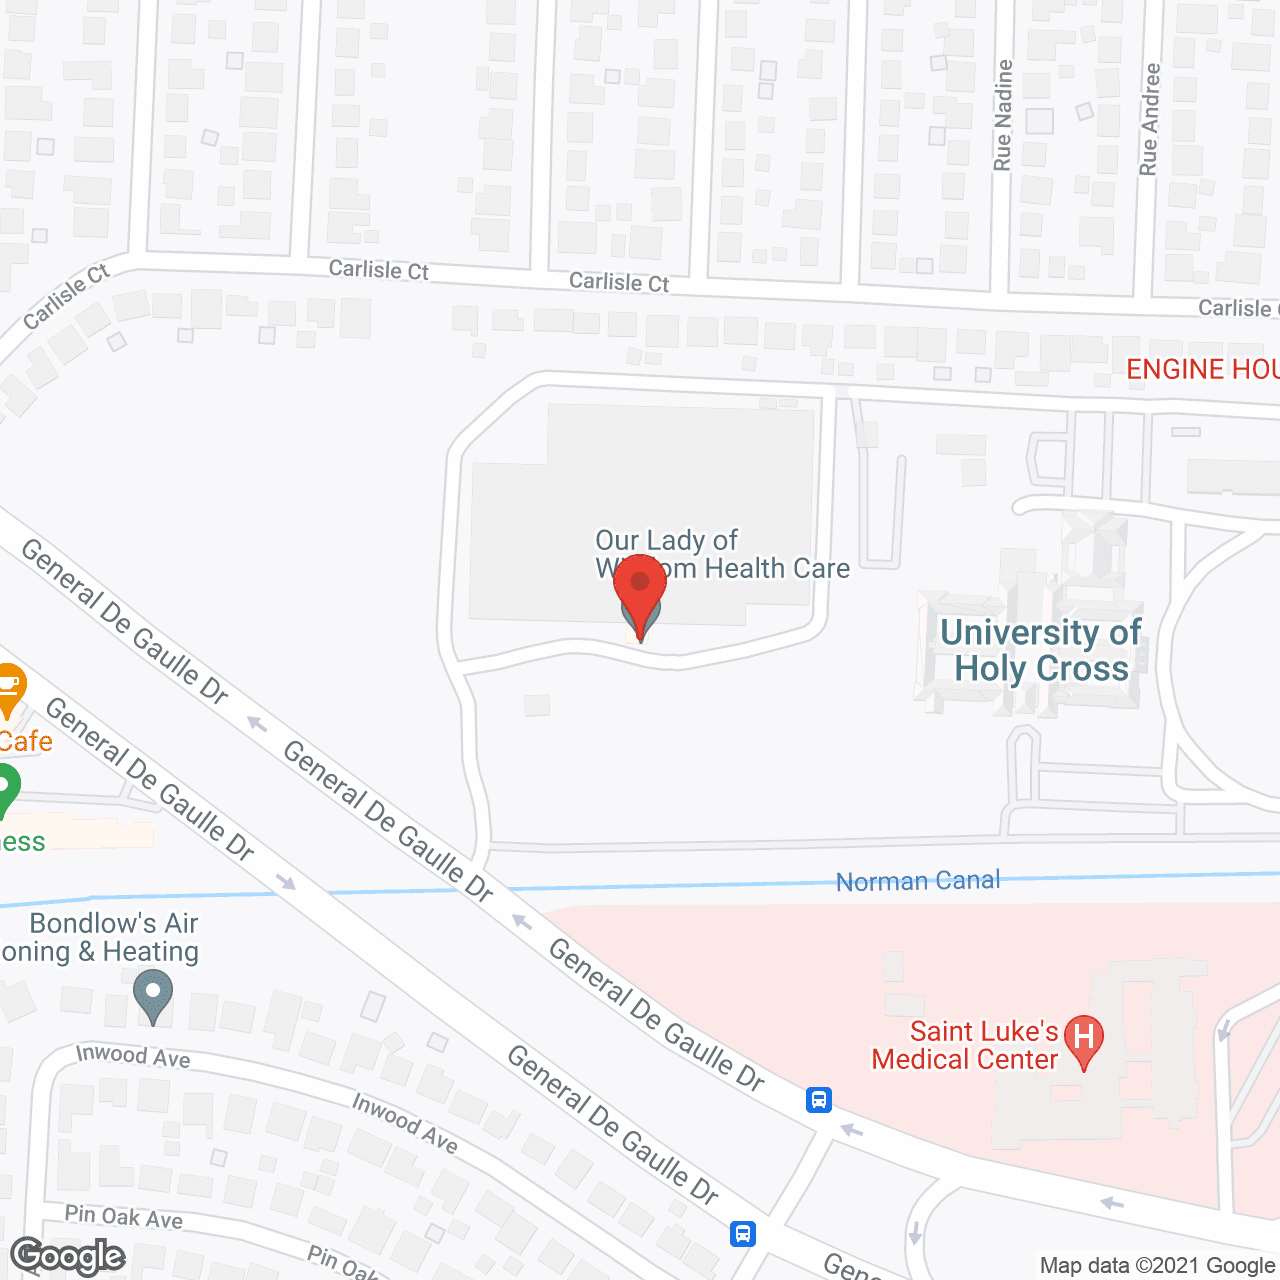 Our Lady of Wisdom Health Care in google map